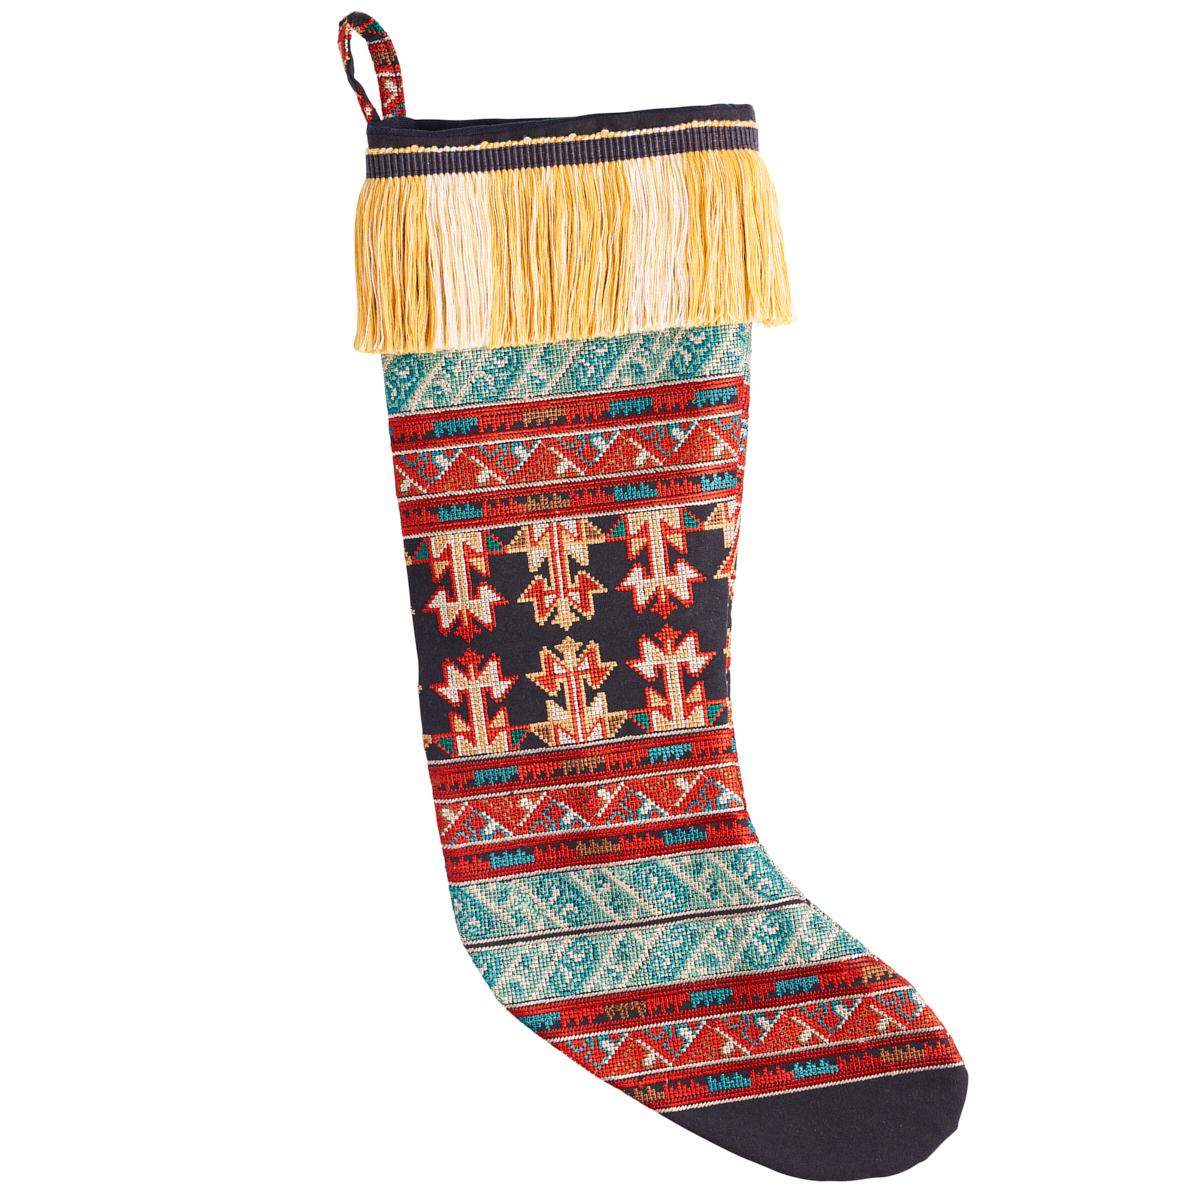 This not-quite-conventional holiday stocking is ornately embroidered with cross-stitched stripes and finished with a soft silky fringe for a limited-edition holiday stocking that feels festive and folky. Fashioned out of Schumacher’s Vinka